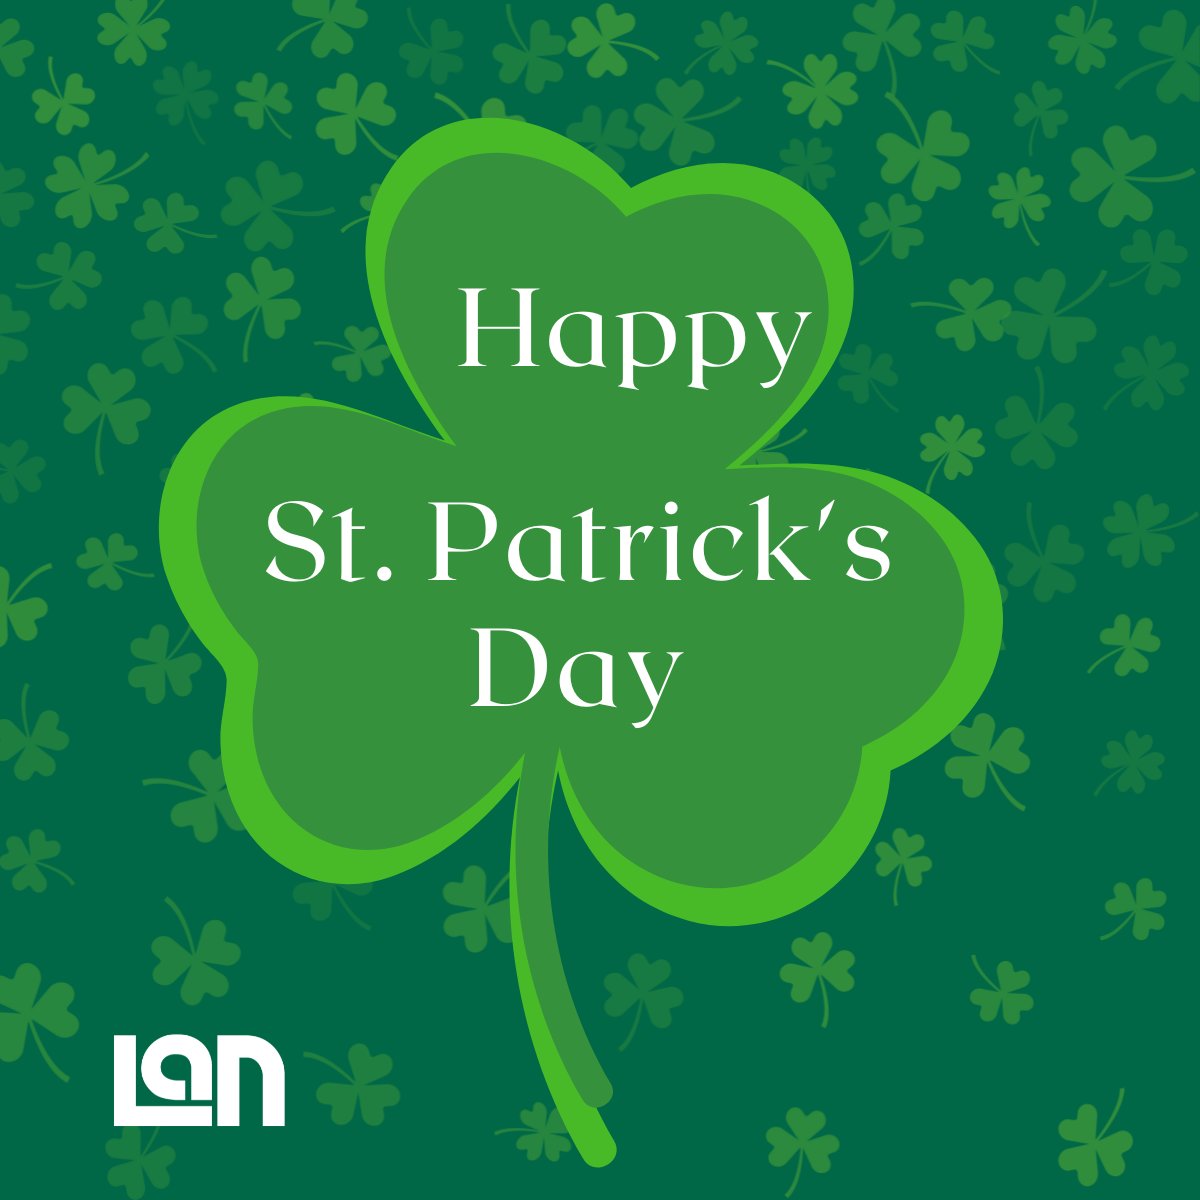 Happy St. Patrick’s Day from LAN! 🍀 Wishing you all a day filled with prosperity, success, and a touch of green! #StPatricksDay24